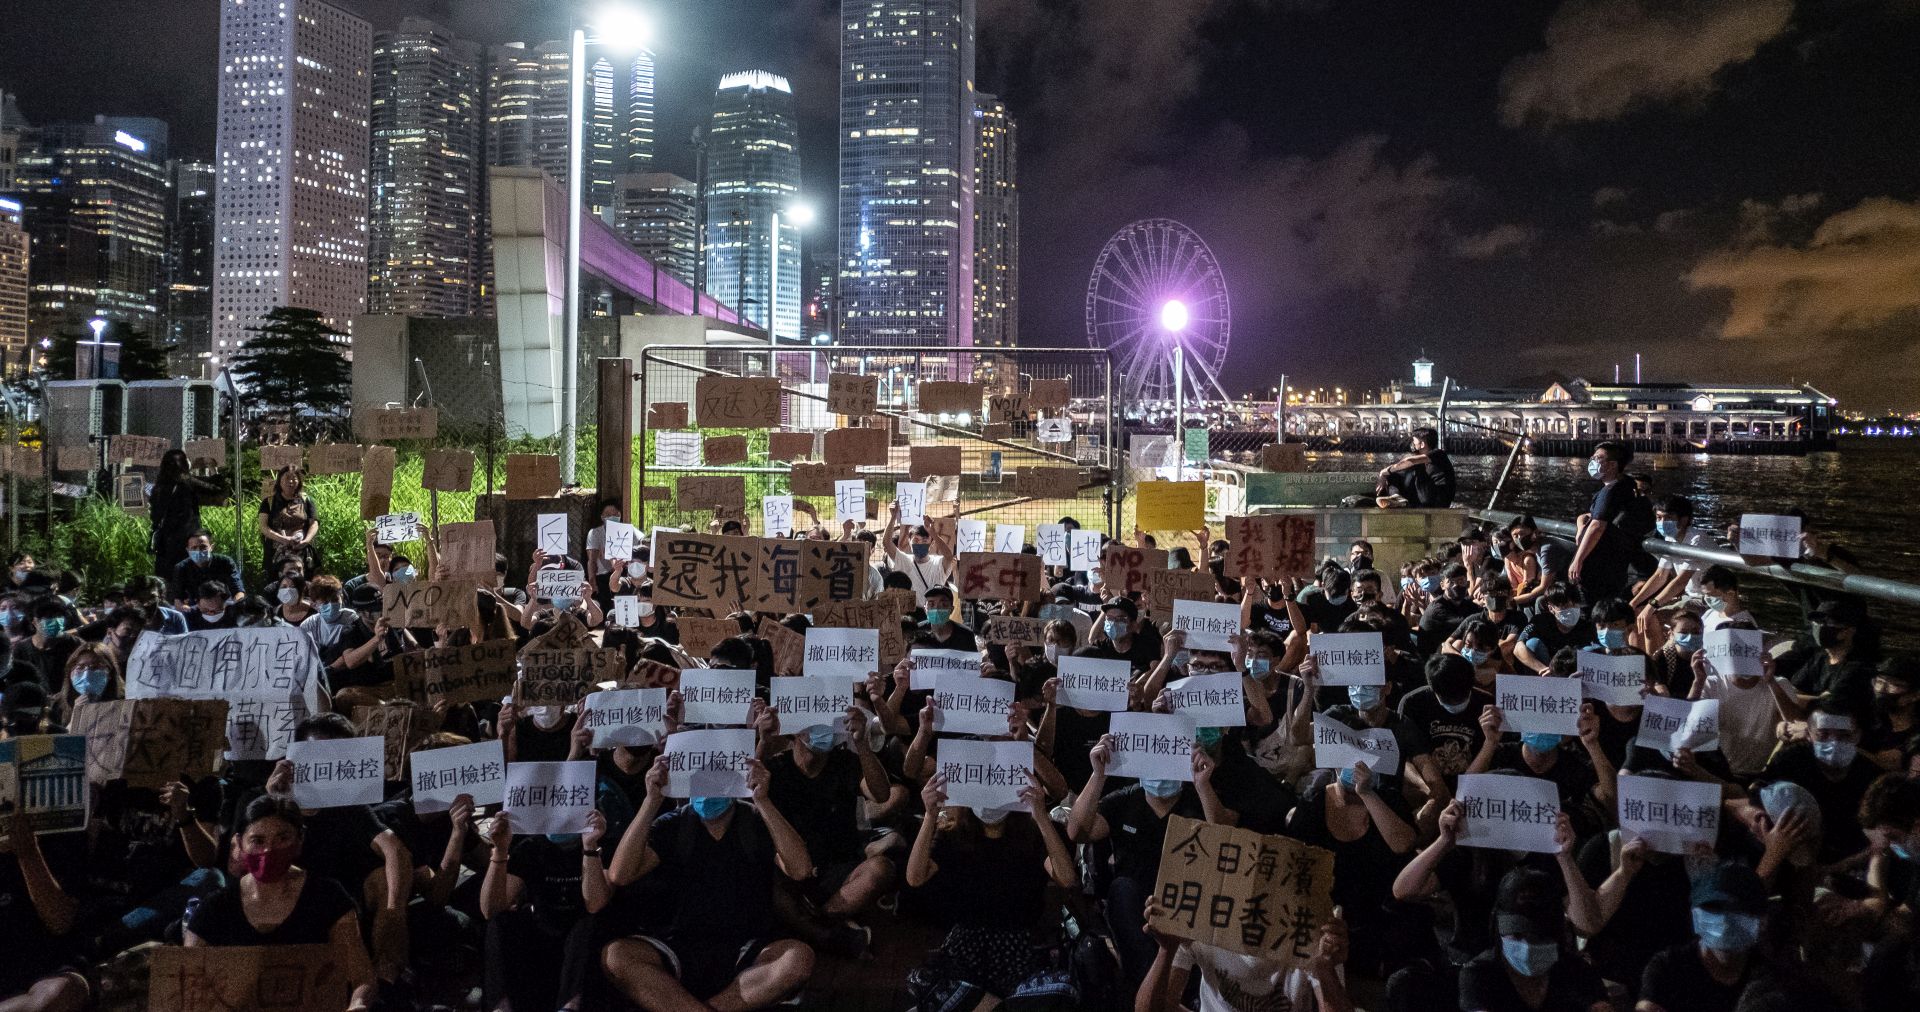 epa07681335 Protesters gather near a plot of land, which was just transferred to the People's Liberation Army (PLA), on the Victoria Harbour waterfront in Hong Kong, China, 29 June 2019. A group of anti-extradition bill protesters moved briefly onto a plot of land that automatically transferred to the PLA at midnight on Saturday. Police cleared the restricted site of protesters just minutes before the area was designated a dock of the PLA.  EPA/CHAN LONG HEI RESEND: LARGER FILE SIZE